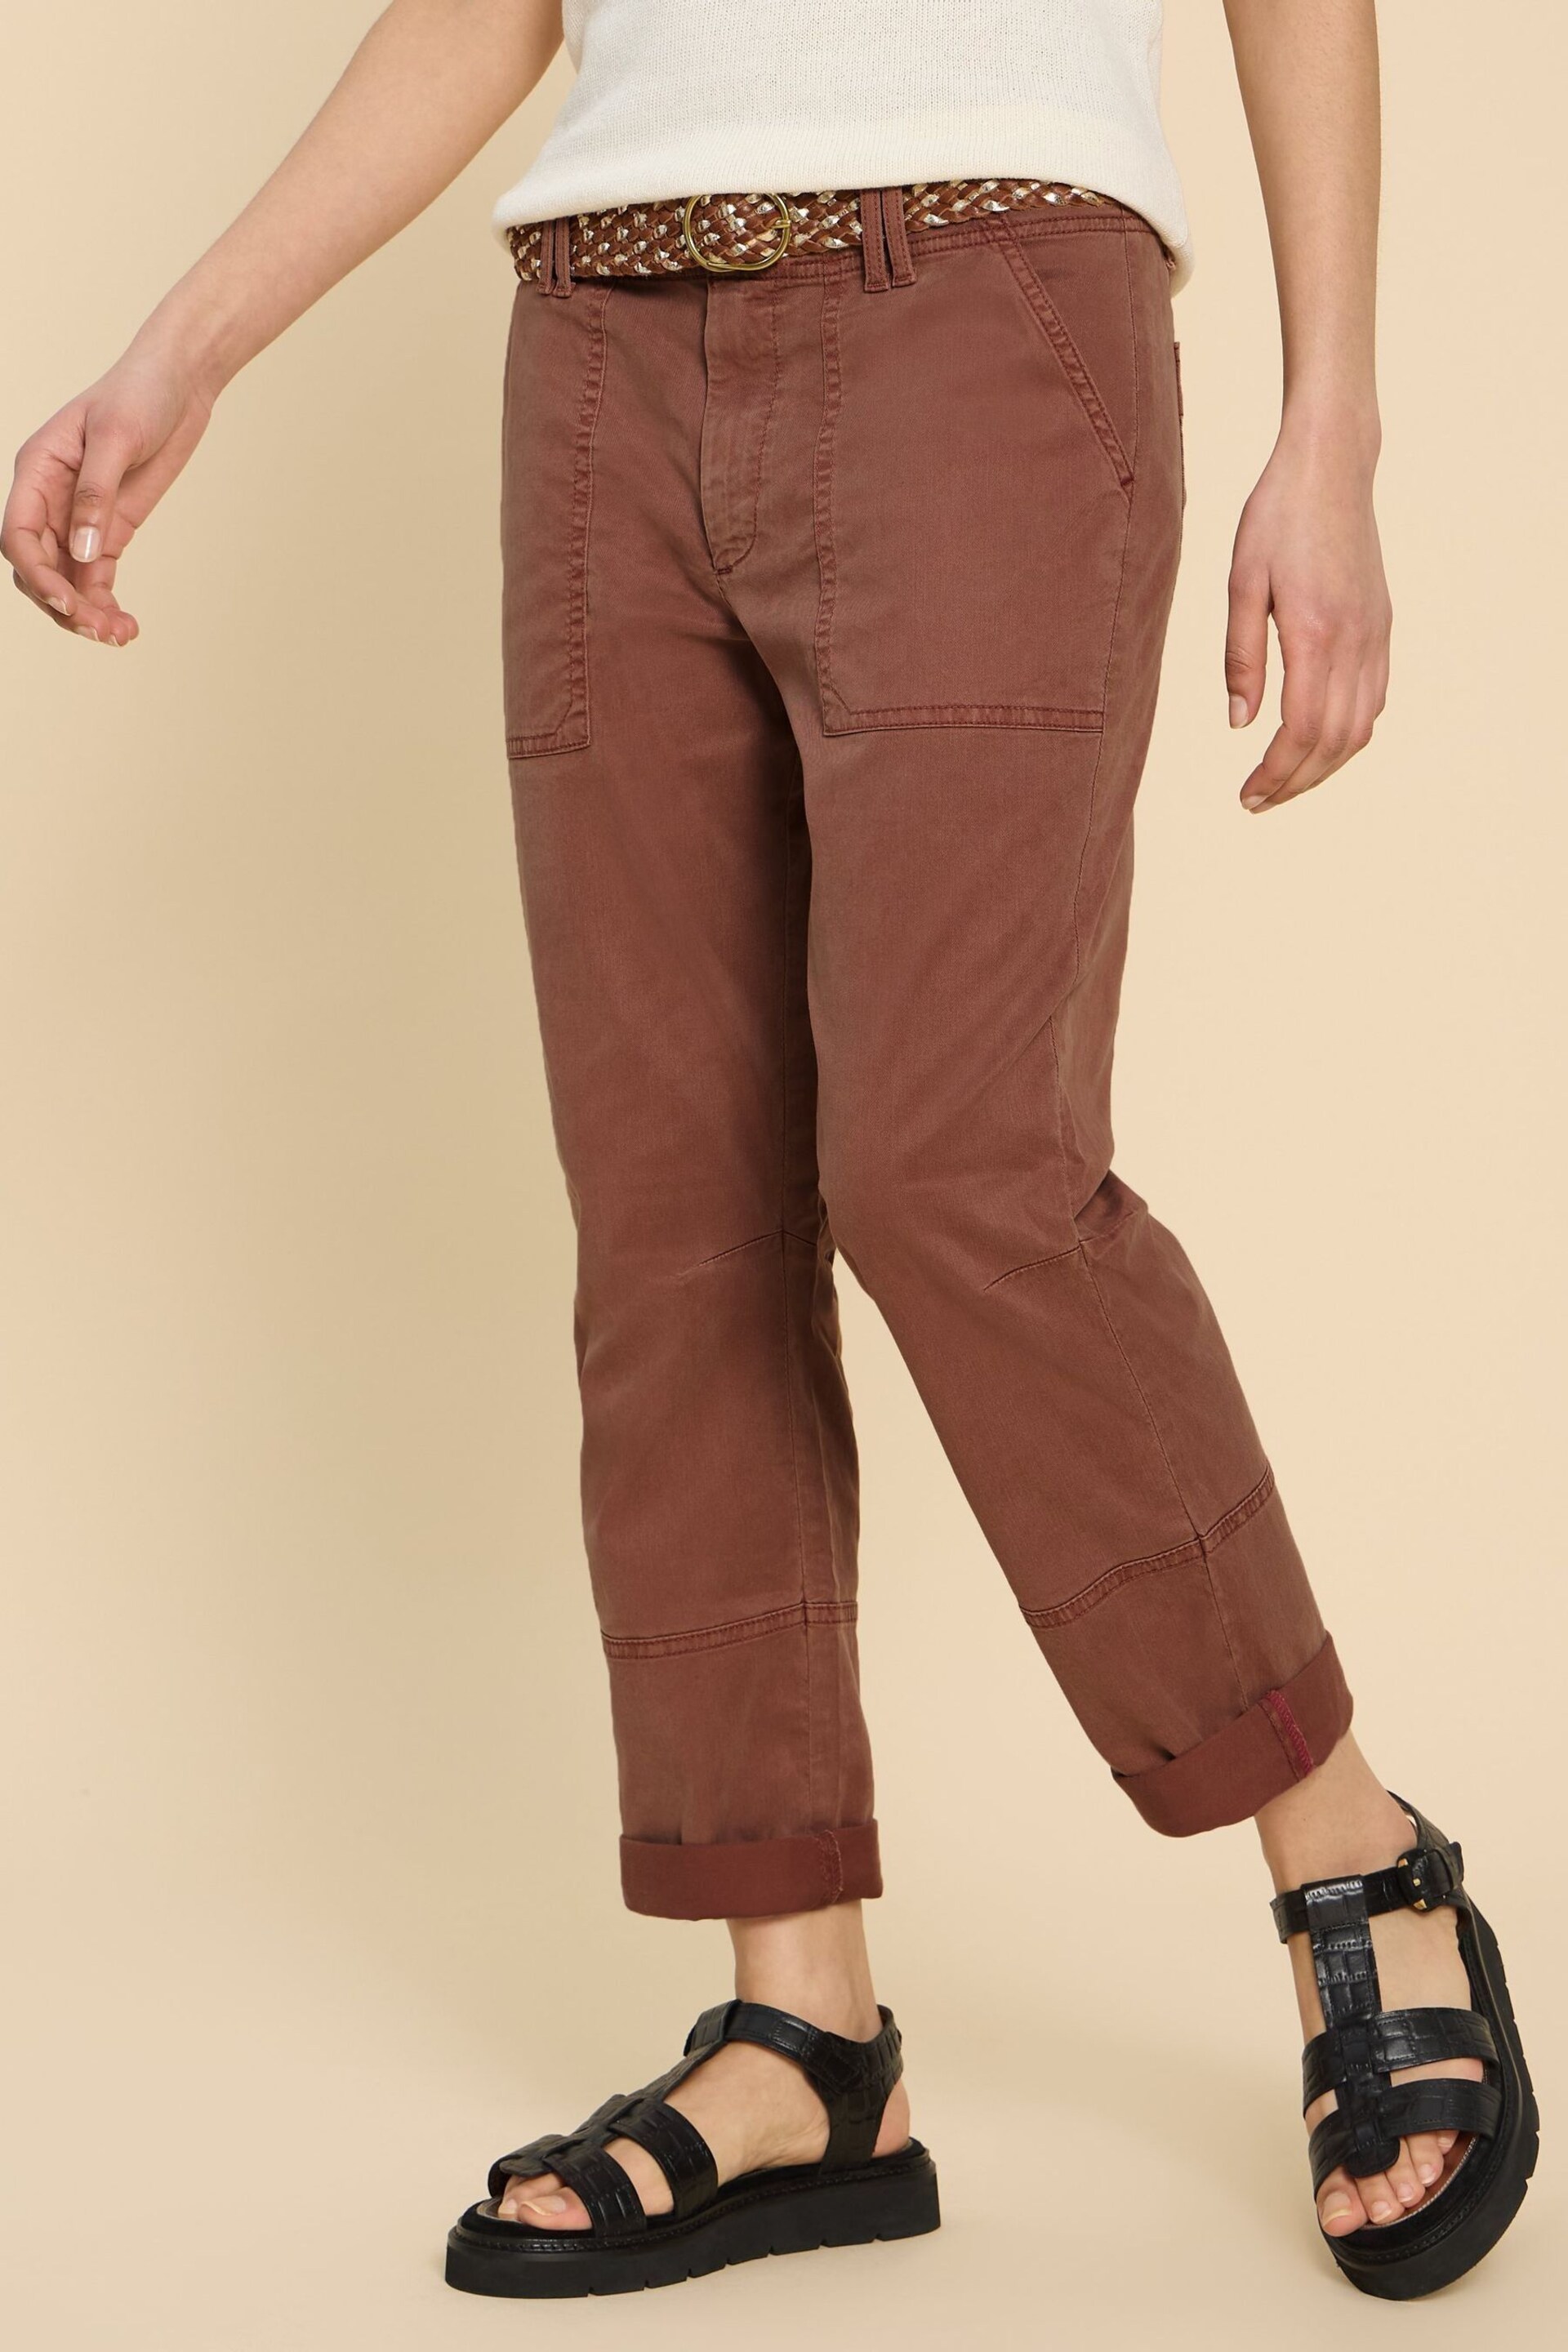 White Stuff Brown Blaire Trousers - Image 1 of 7